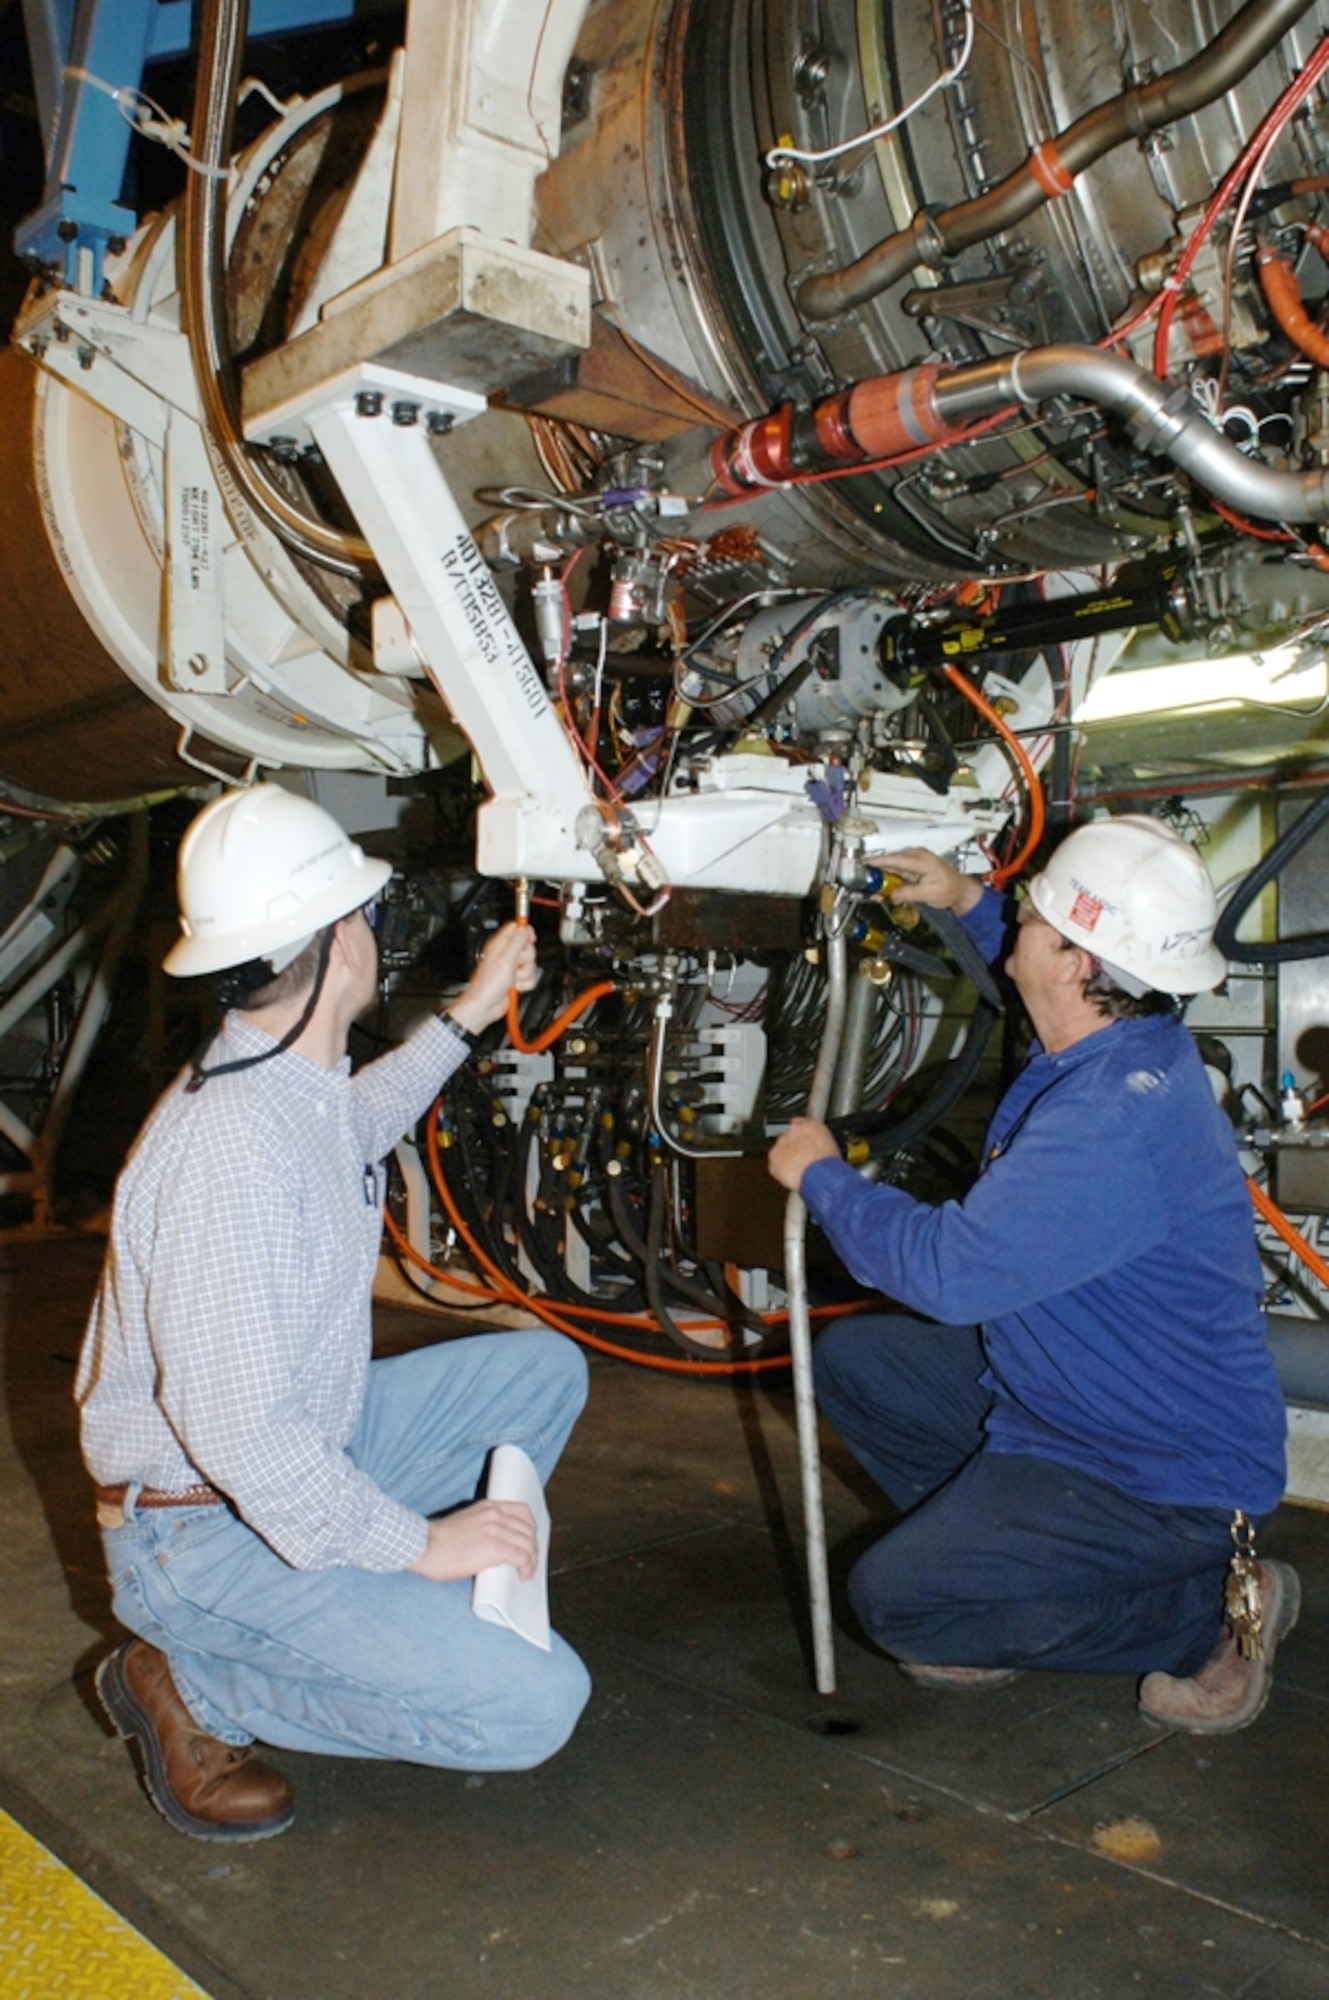 ARNOLD AIR FORCE BASE, Tenn. - AEDC Test Operations personnel make final inspections of an F118-GE-100 engine prior to altitude testing.  The engine, which powers the B-2 bomber, is part of the F118 Service Life Extension Program (SLEP), which supports the Air Force's Component Improvement Program. (Air Force photo)

